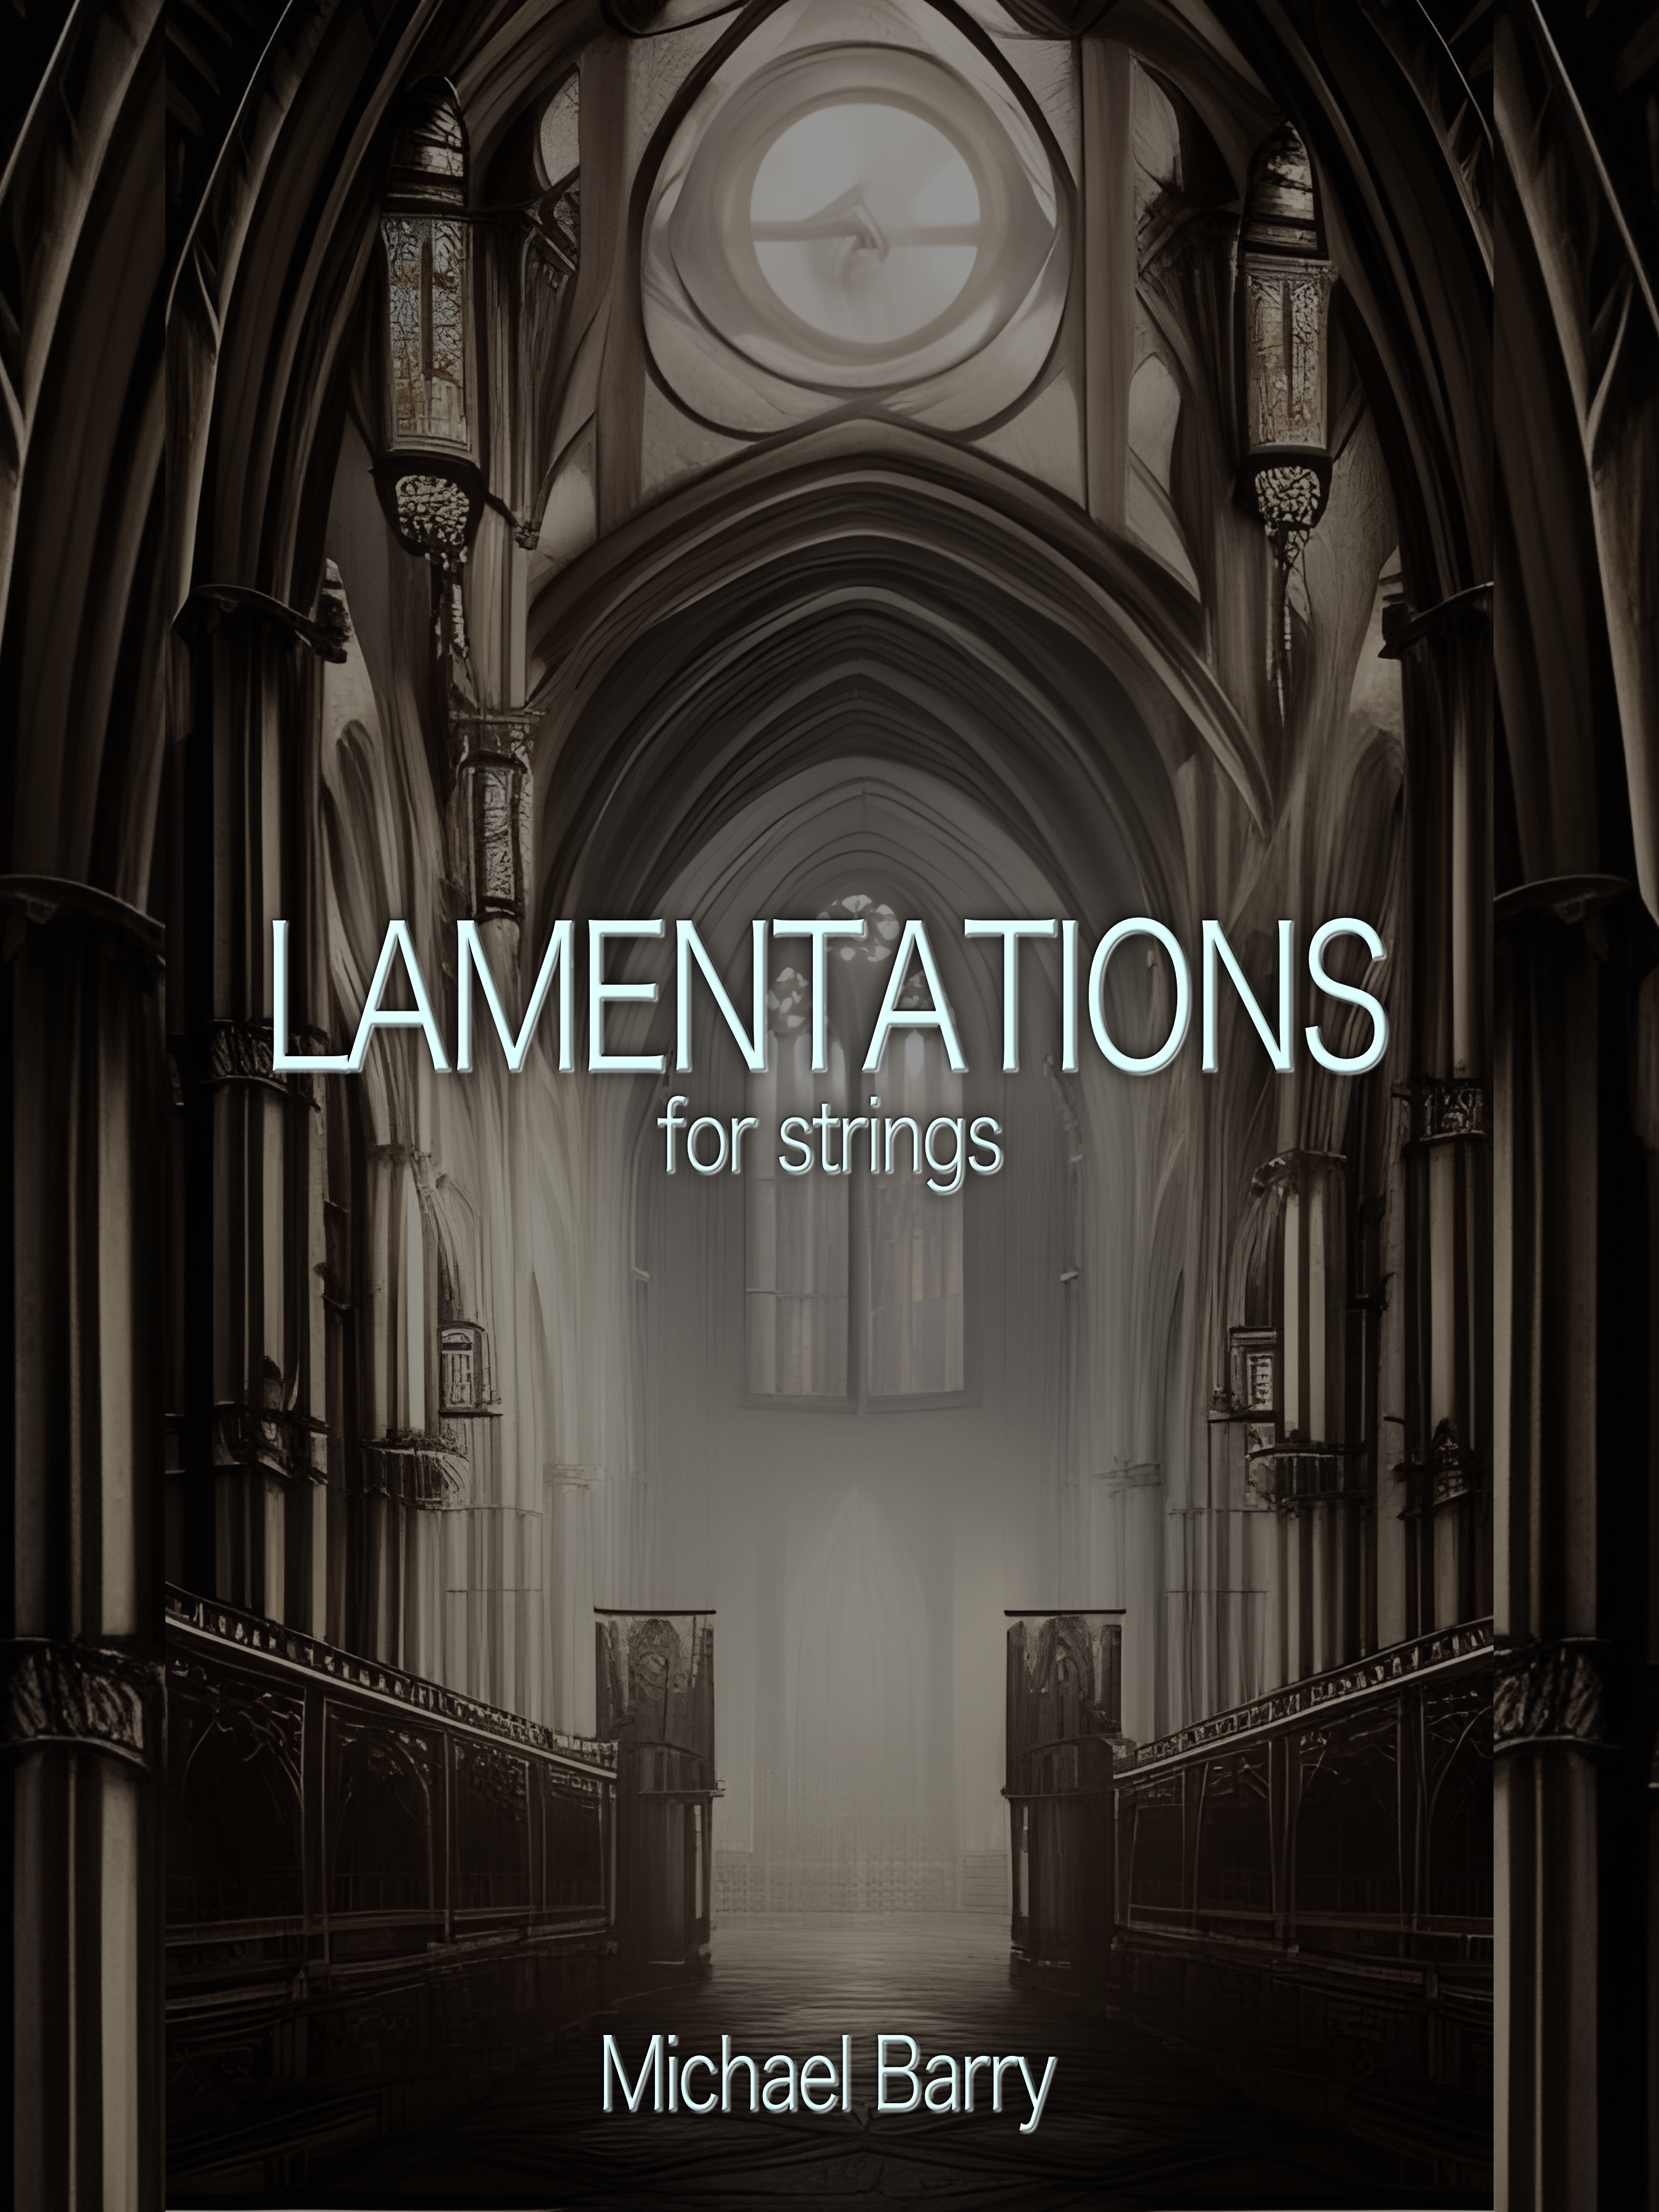 Lamentations (Score Only) by Michael Barry